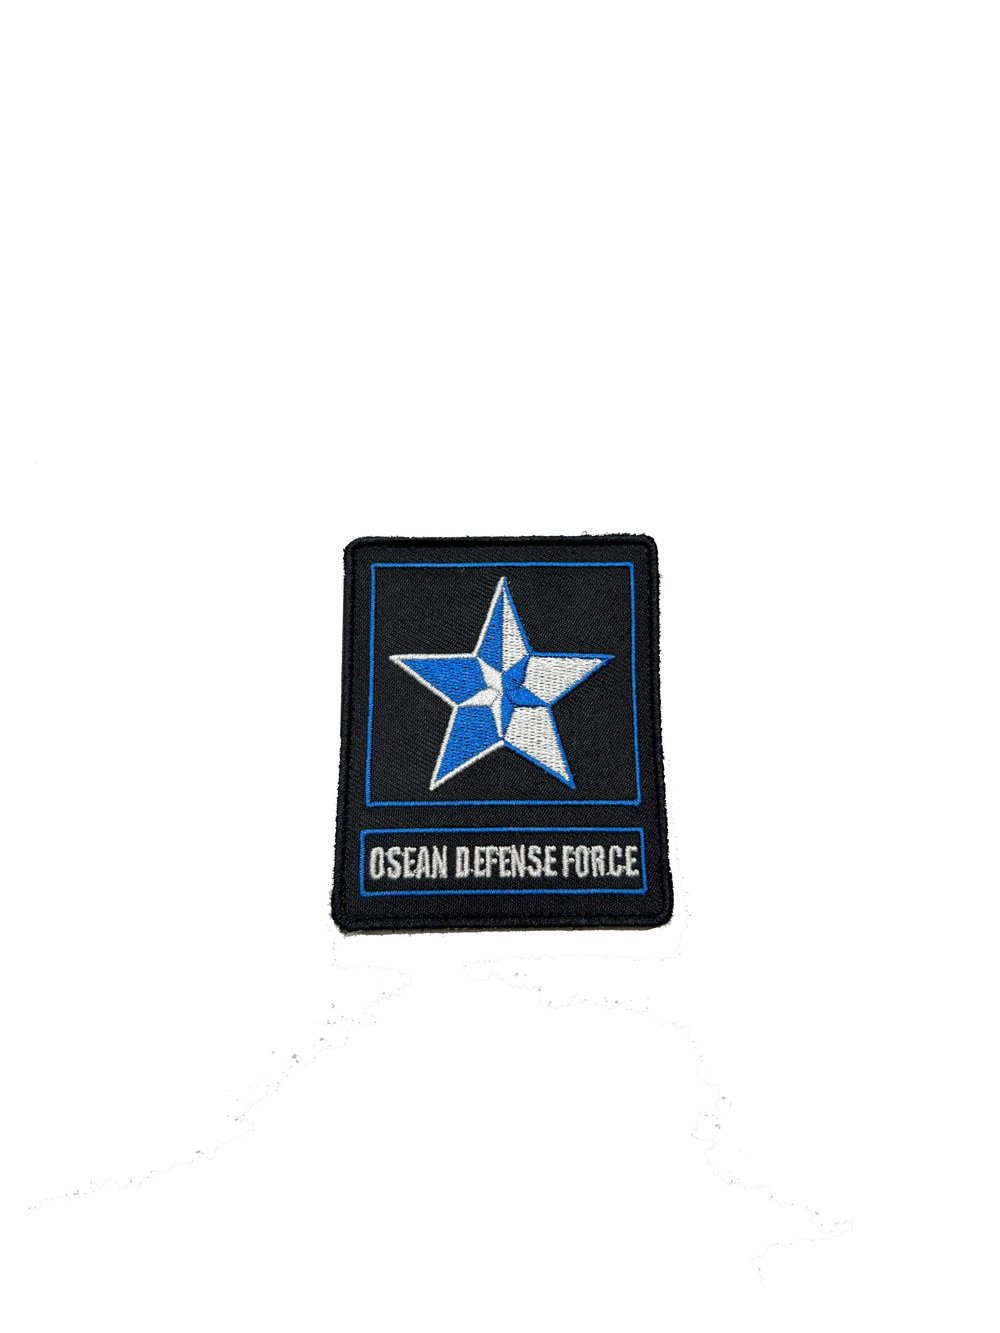 Osean Defense Force Patch